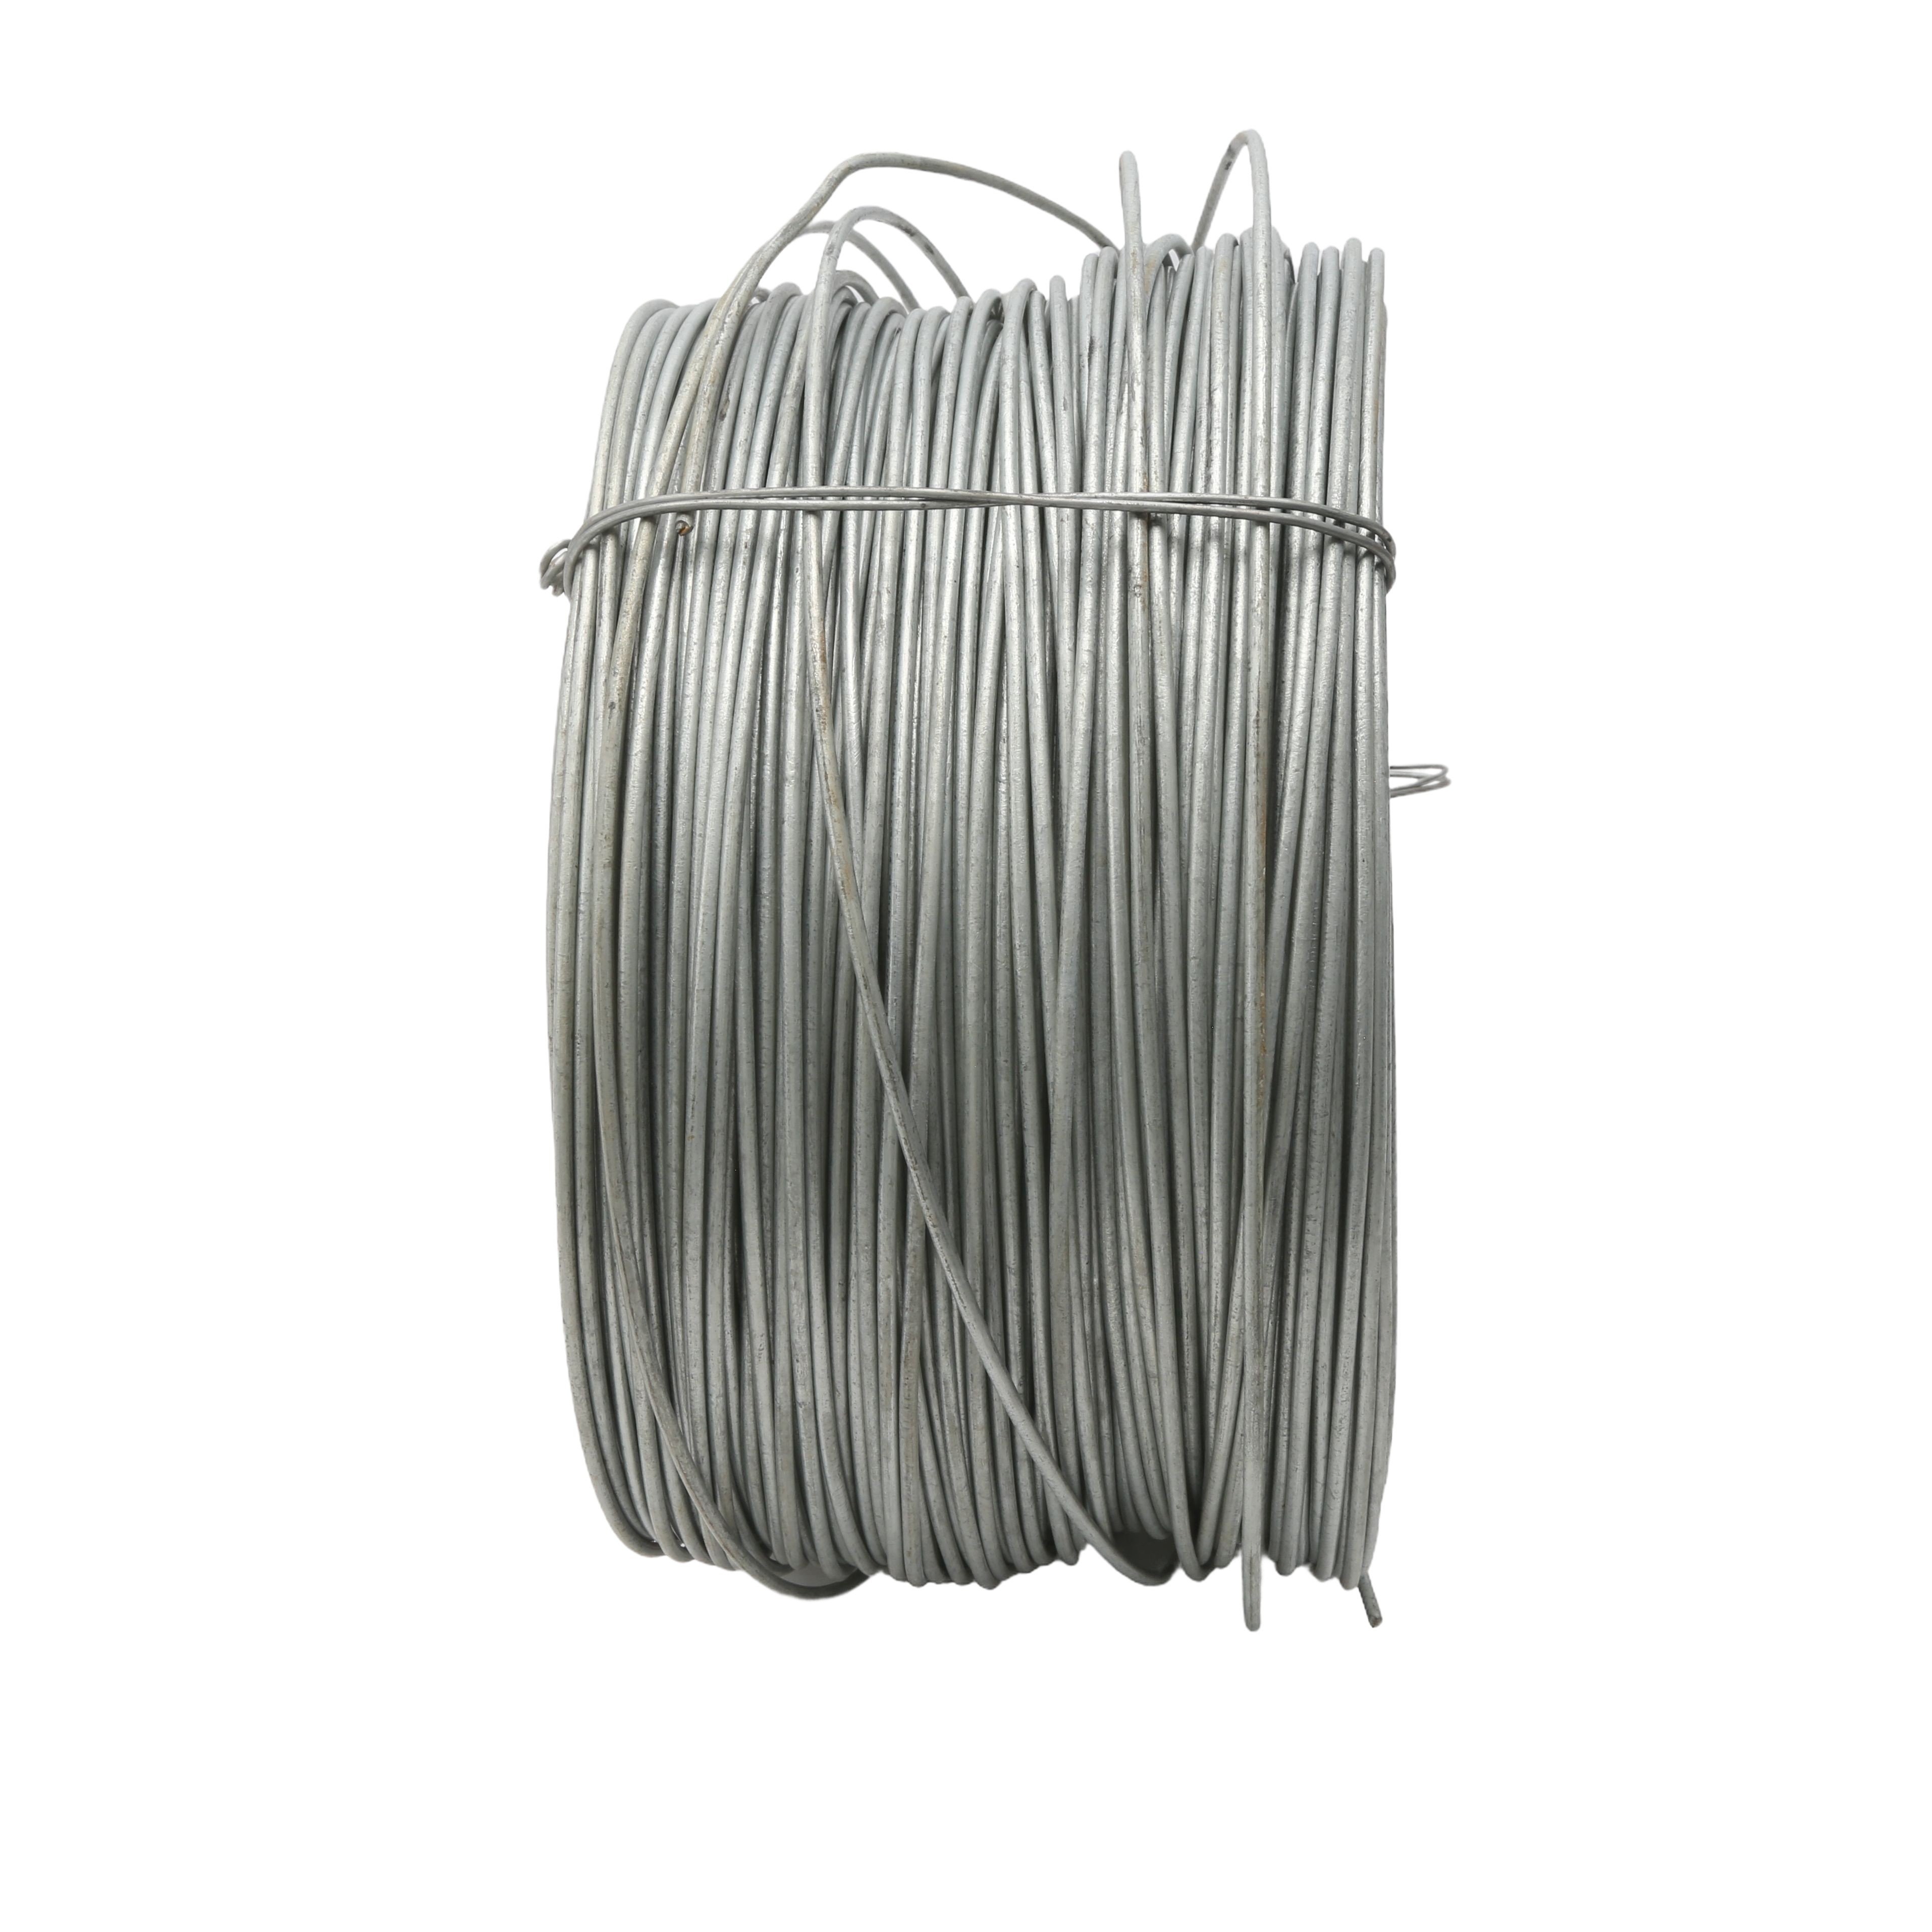 Chain Link Fence 598' Utility Wire [9 Gauge] Fence Tension Wire (1.2 Oz Galvanized  Steel)